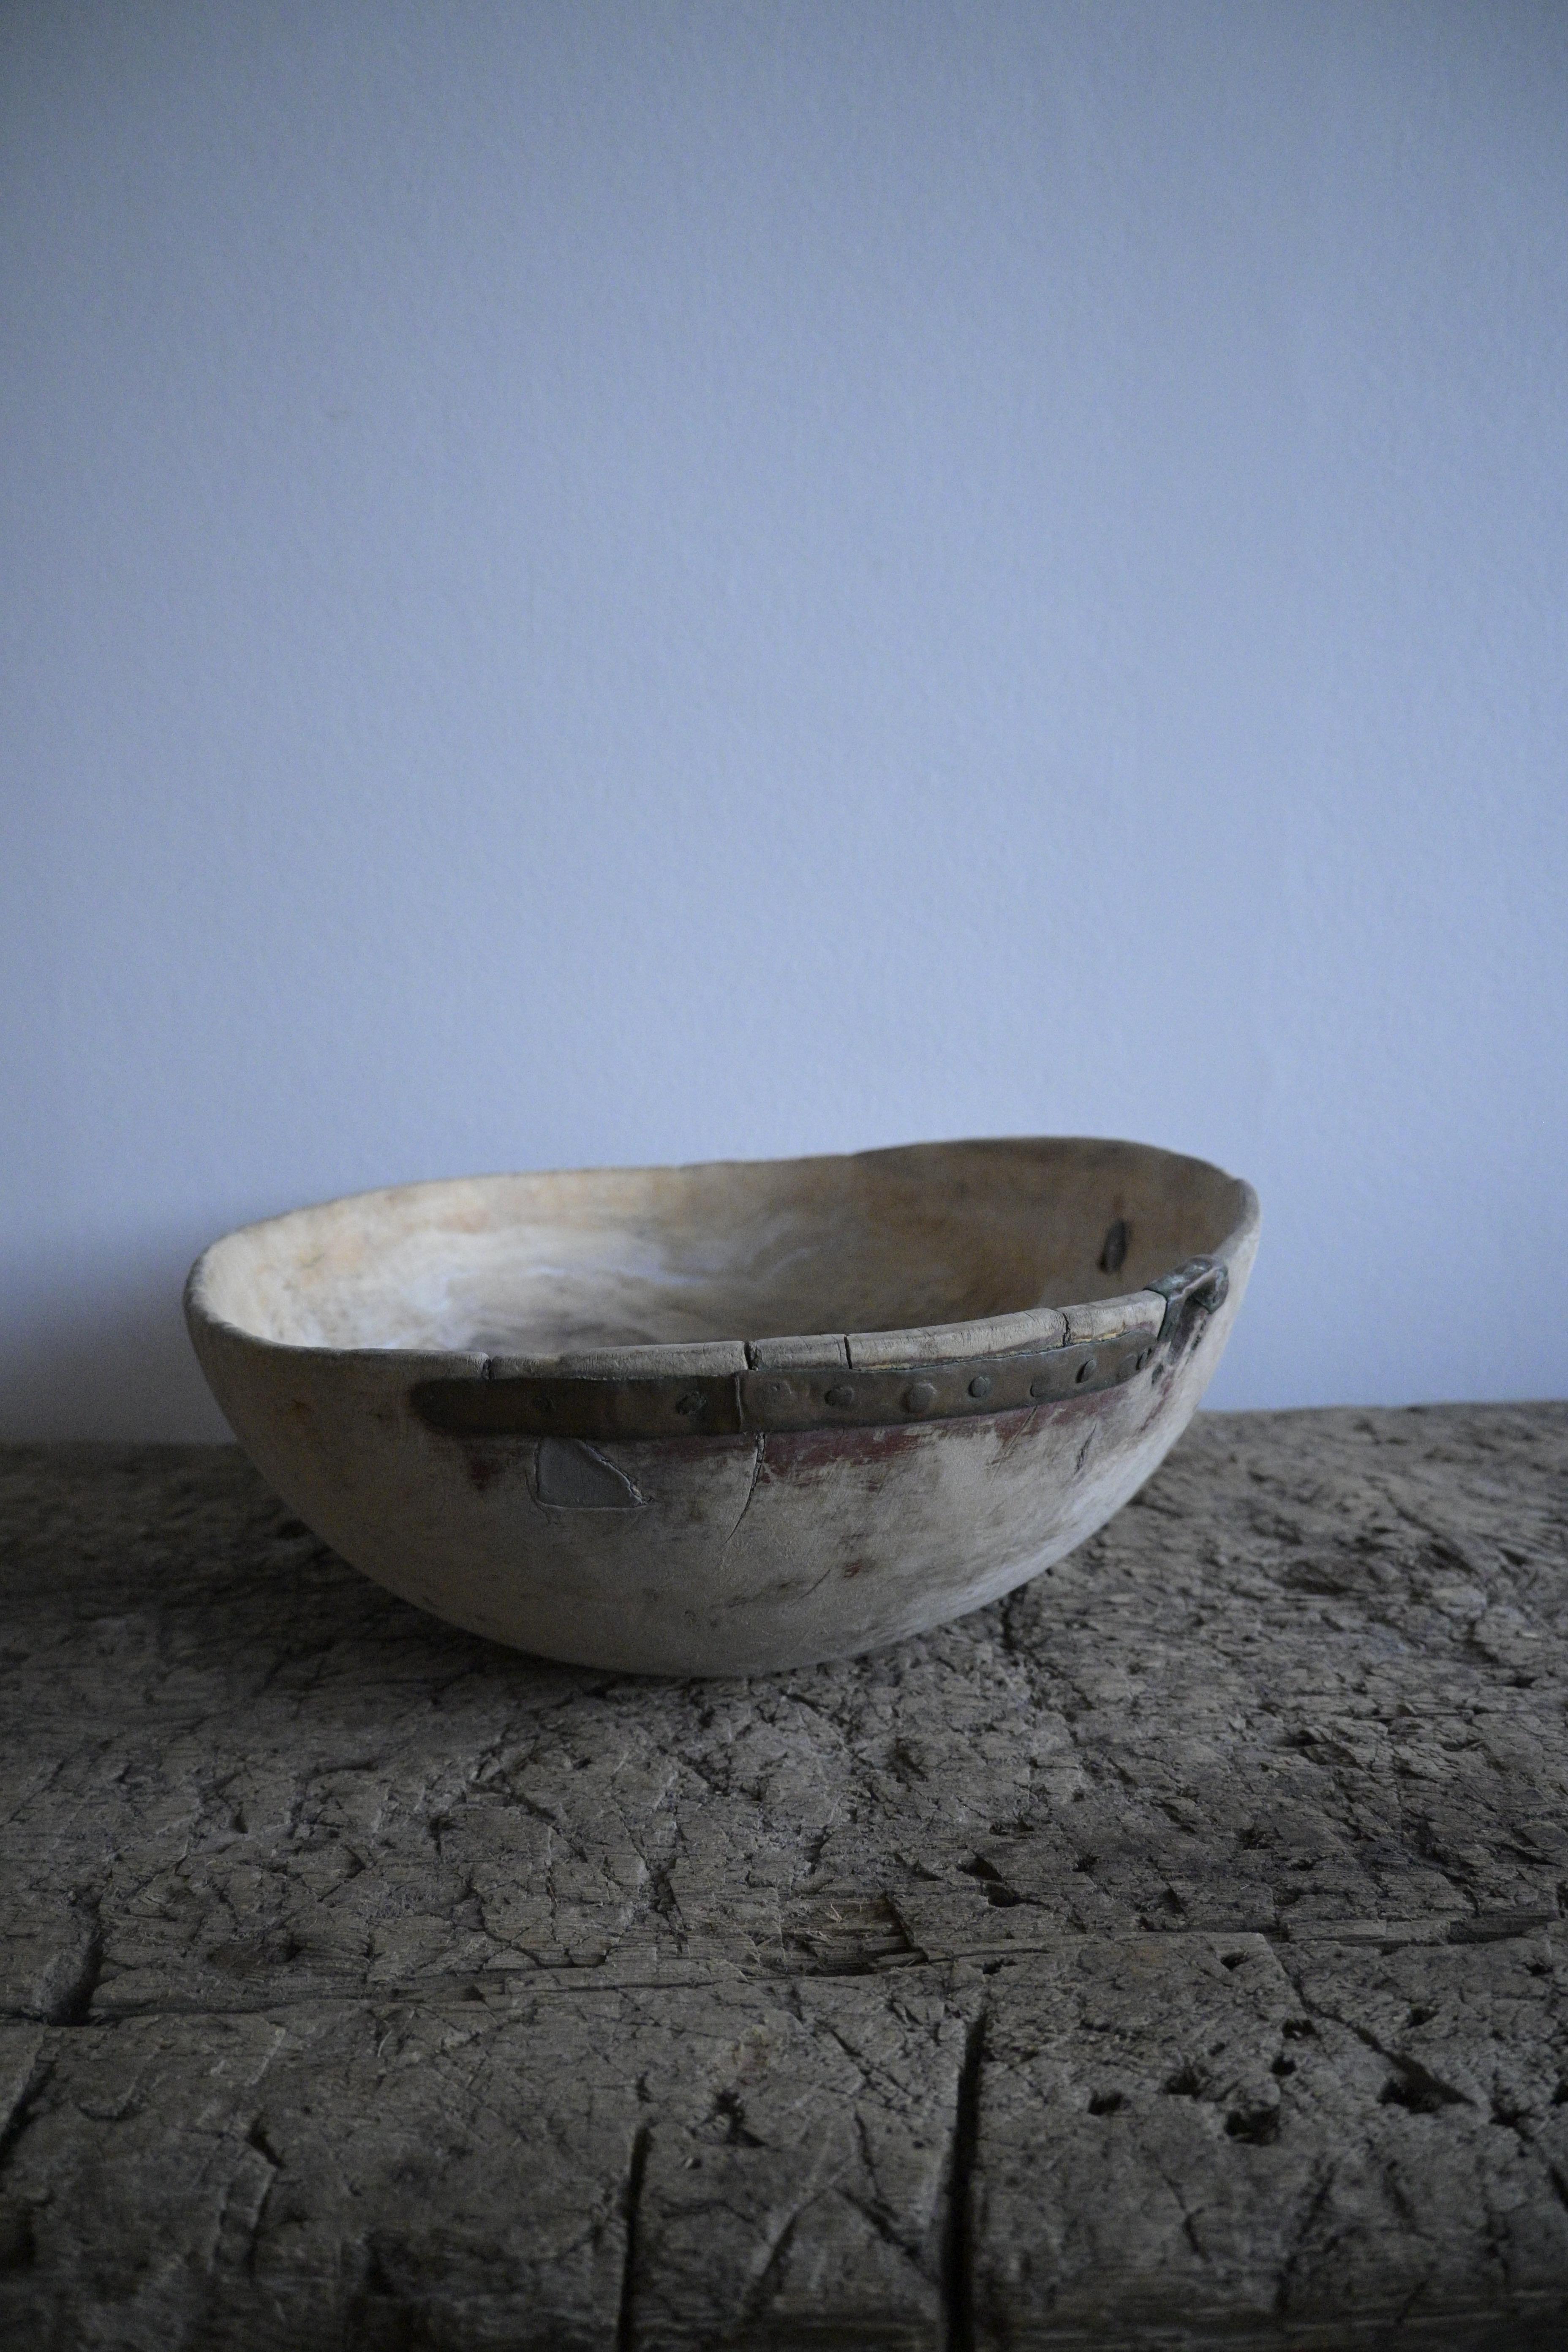 Large Swedish Burl Birch Bowl cirka 1780-1830s

The old repairs on this bowl adds to the character and beauty of this piece.

Traces of original paint remains.

Made out of birch tree.

Height: 13 cm/5.1 inch
Diameter: 35 cm/13.7 inch